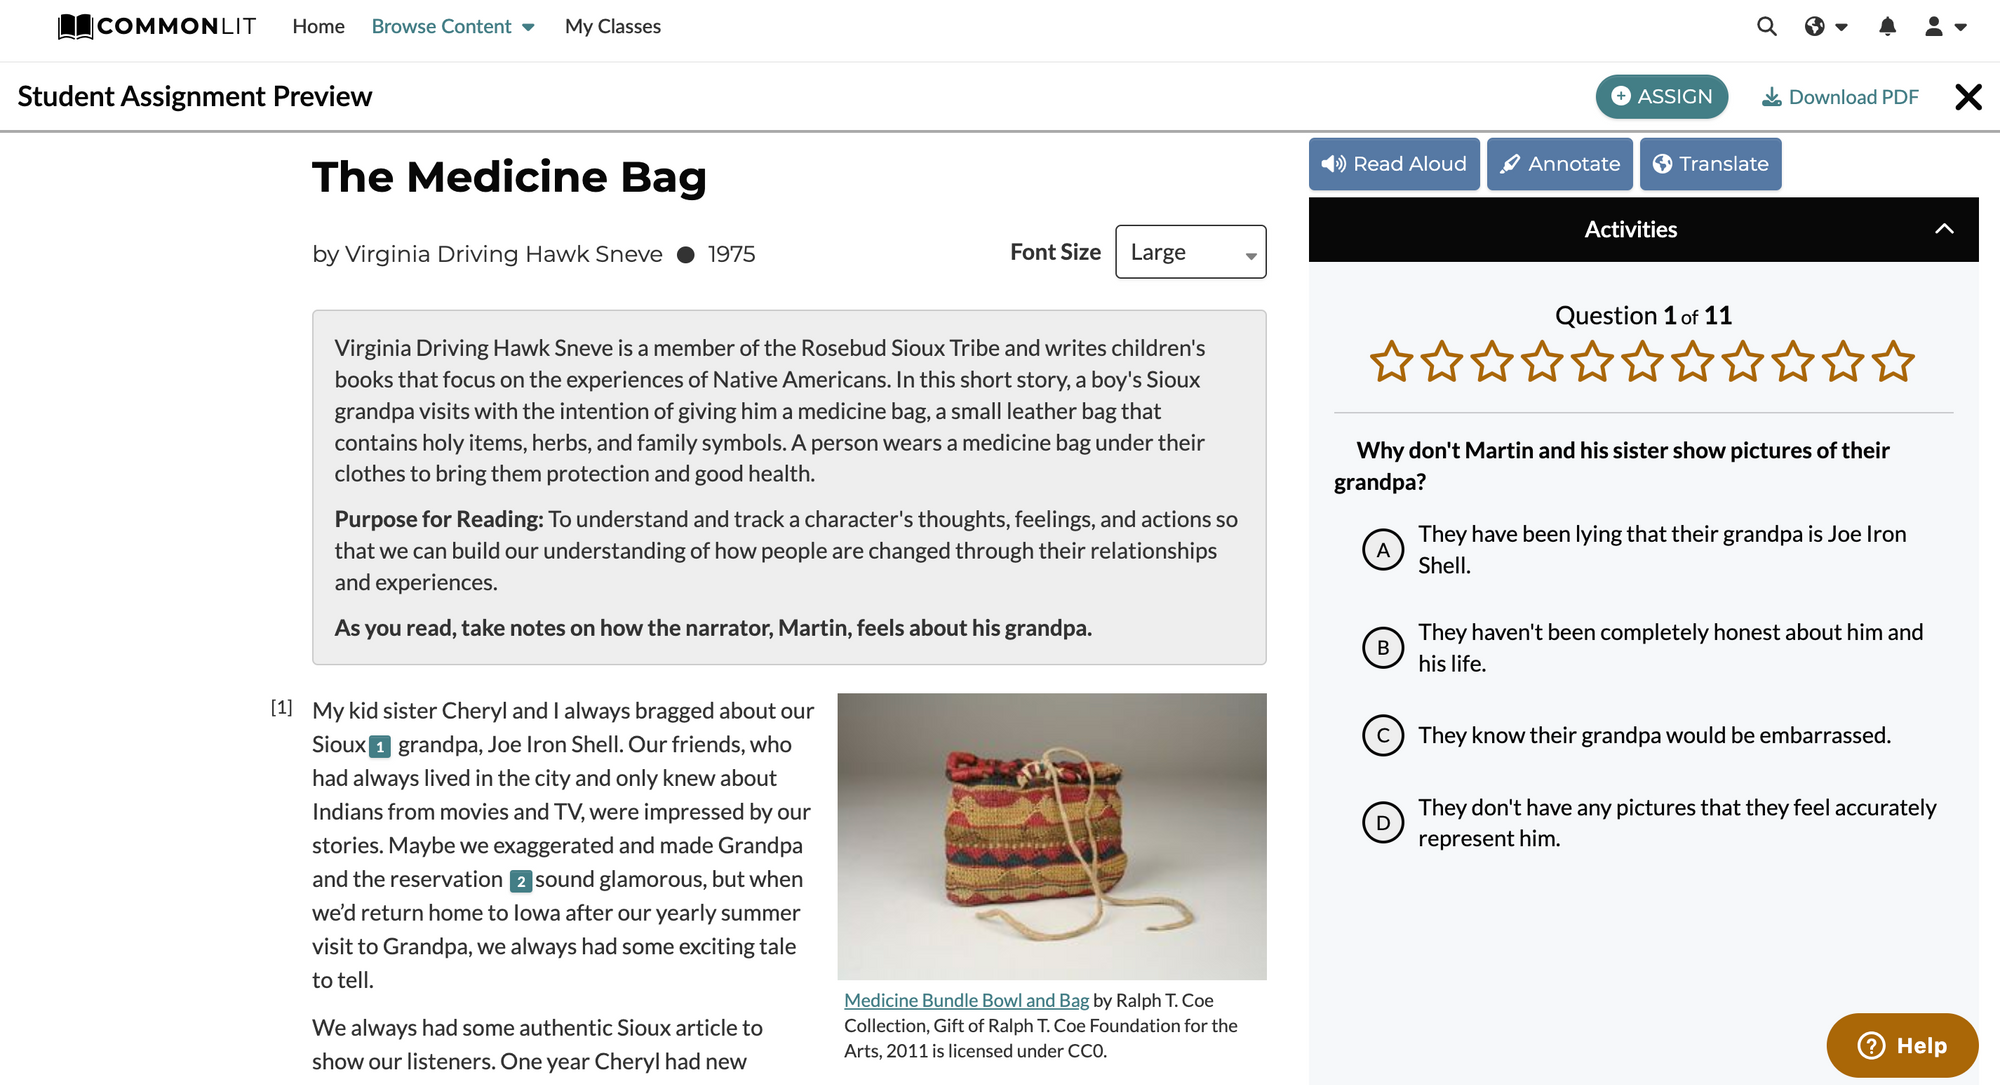 "The Medicine Bag" by Virginia Driving Hawk Sneve Lesson on CommonLit